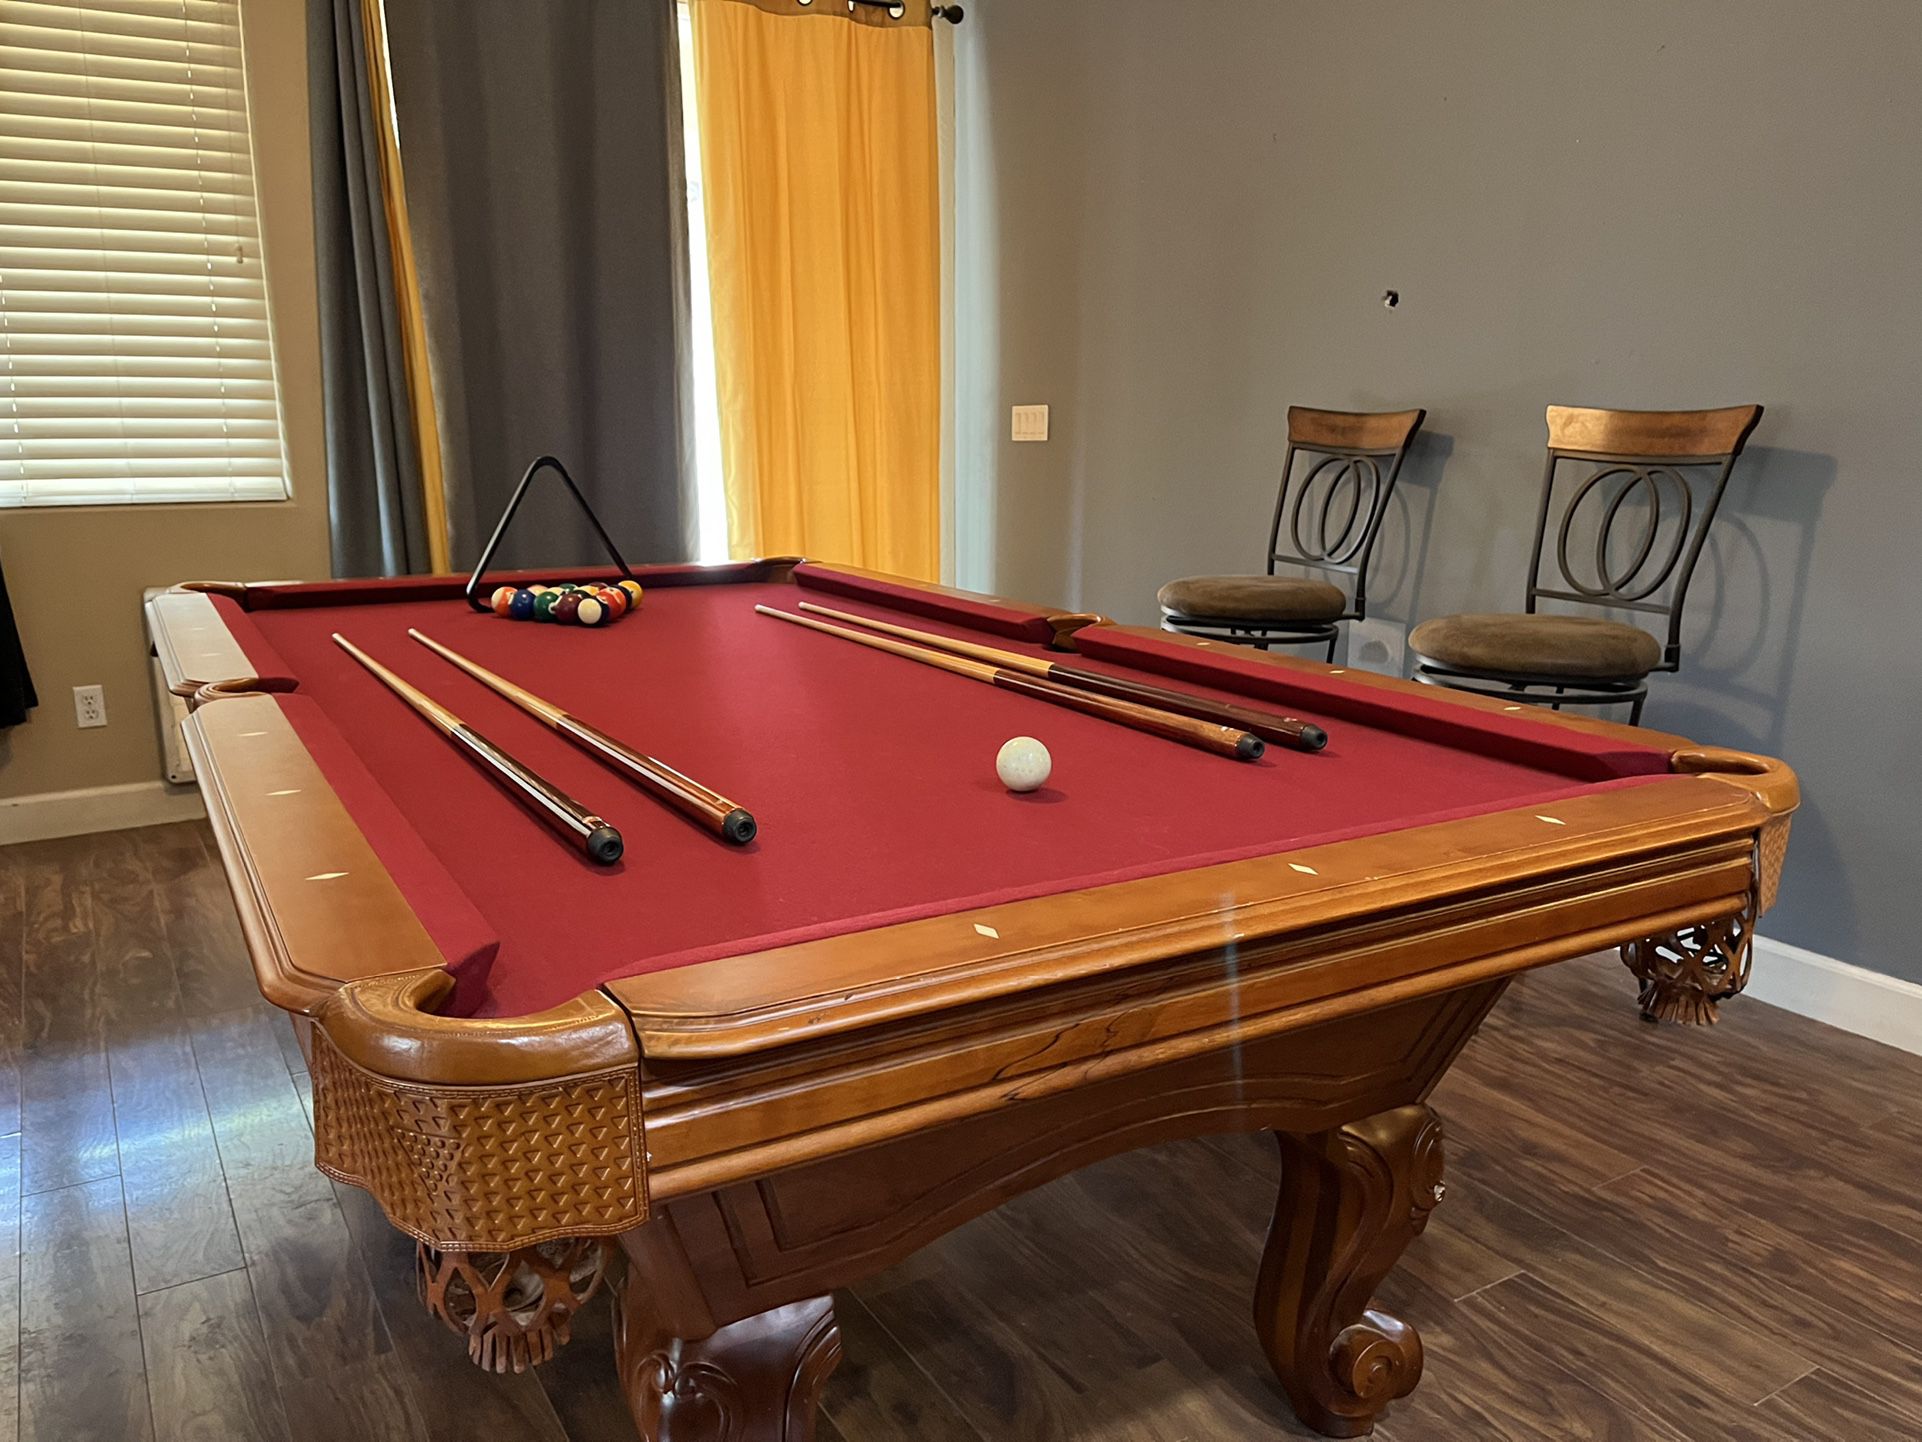 DLT pool table for Sale in Scottsdale, AZ - OfferUp